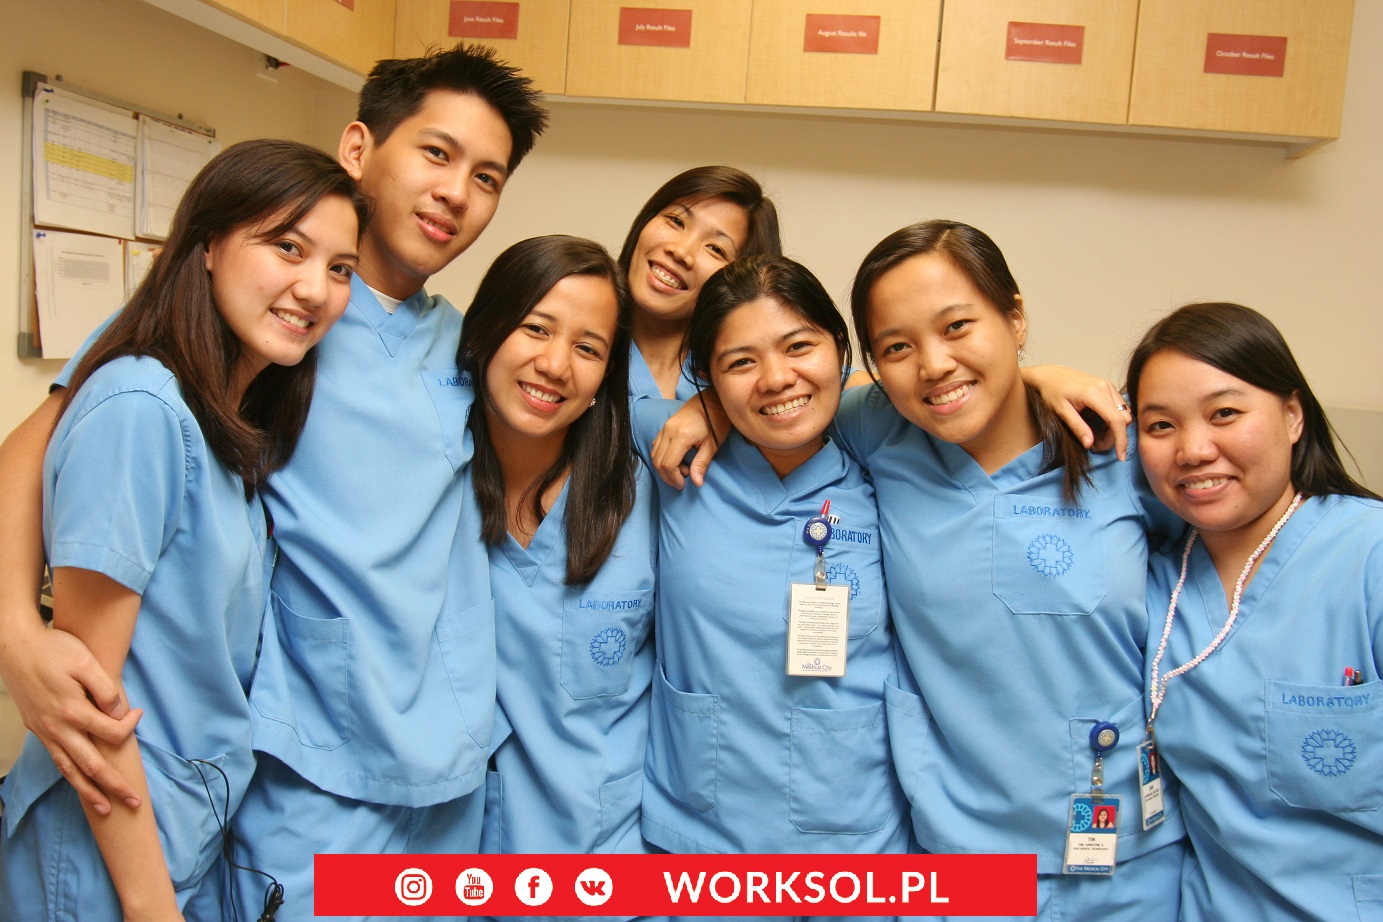  employees from the Philippines